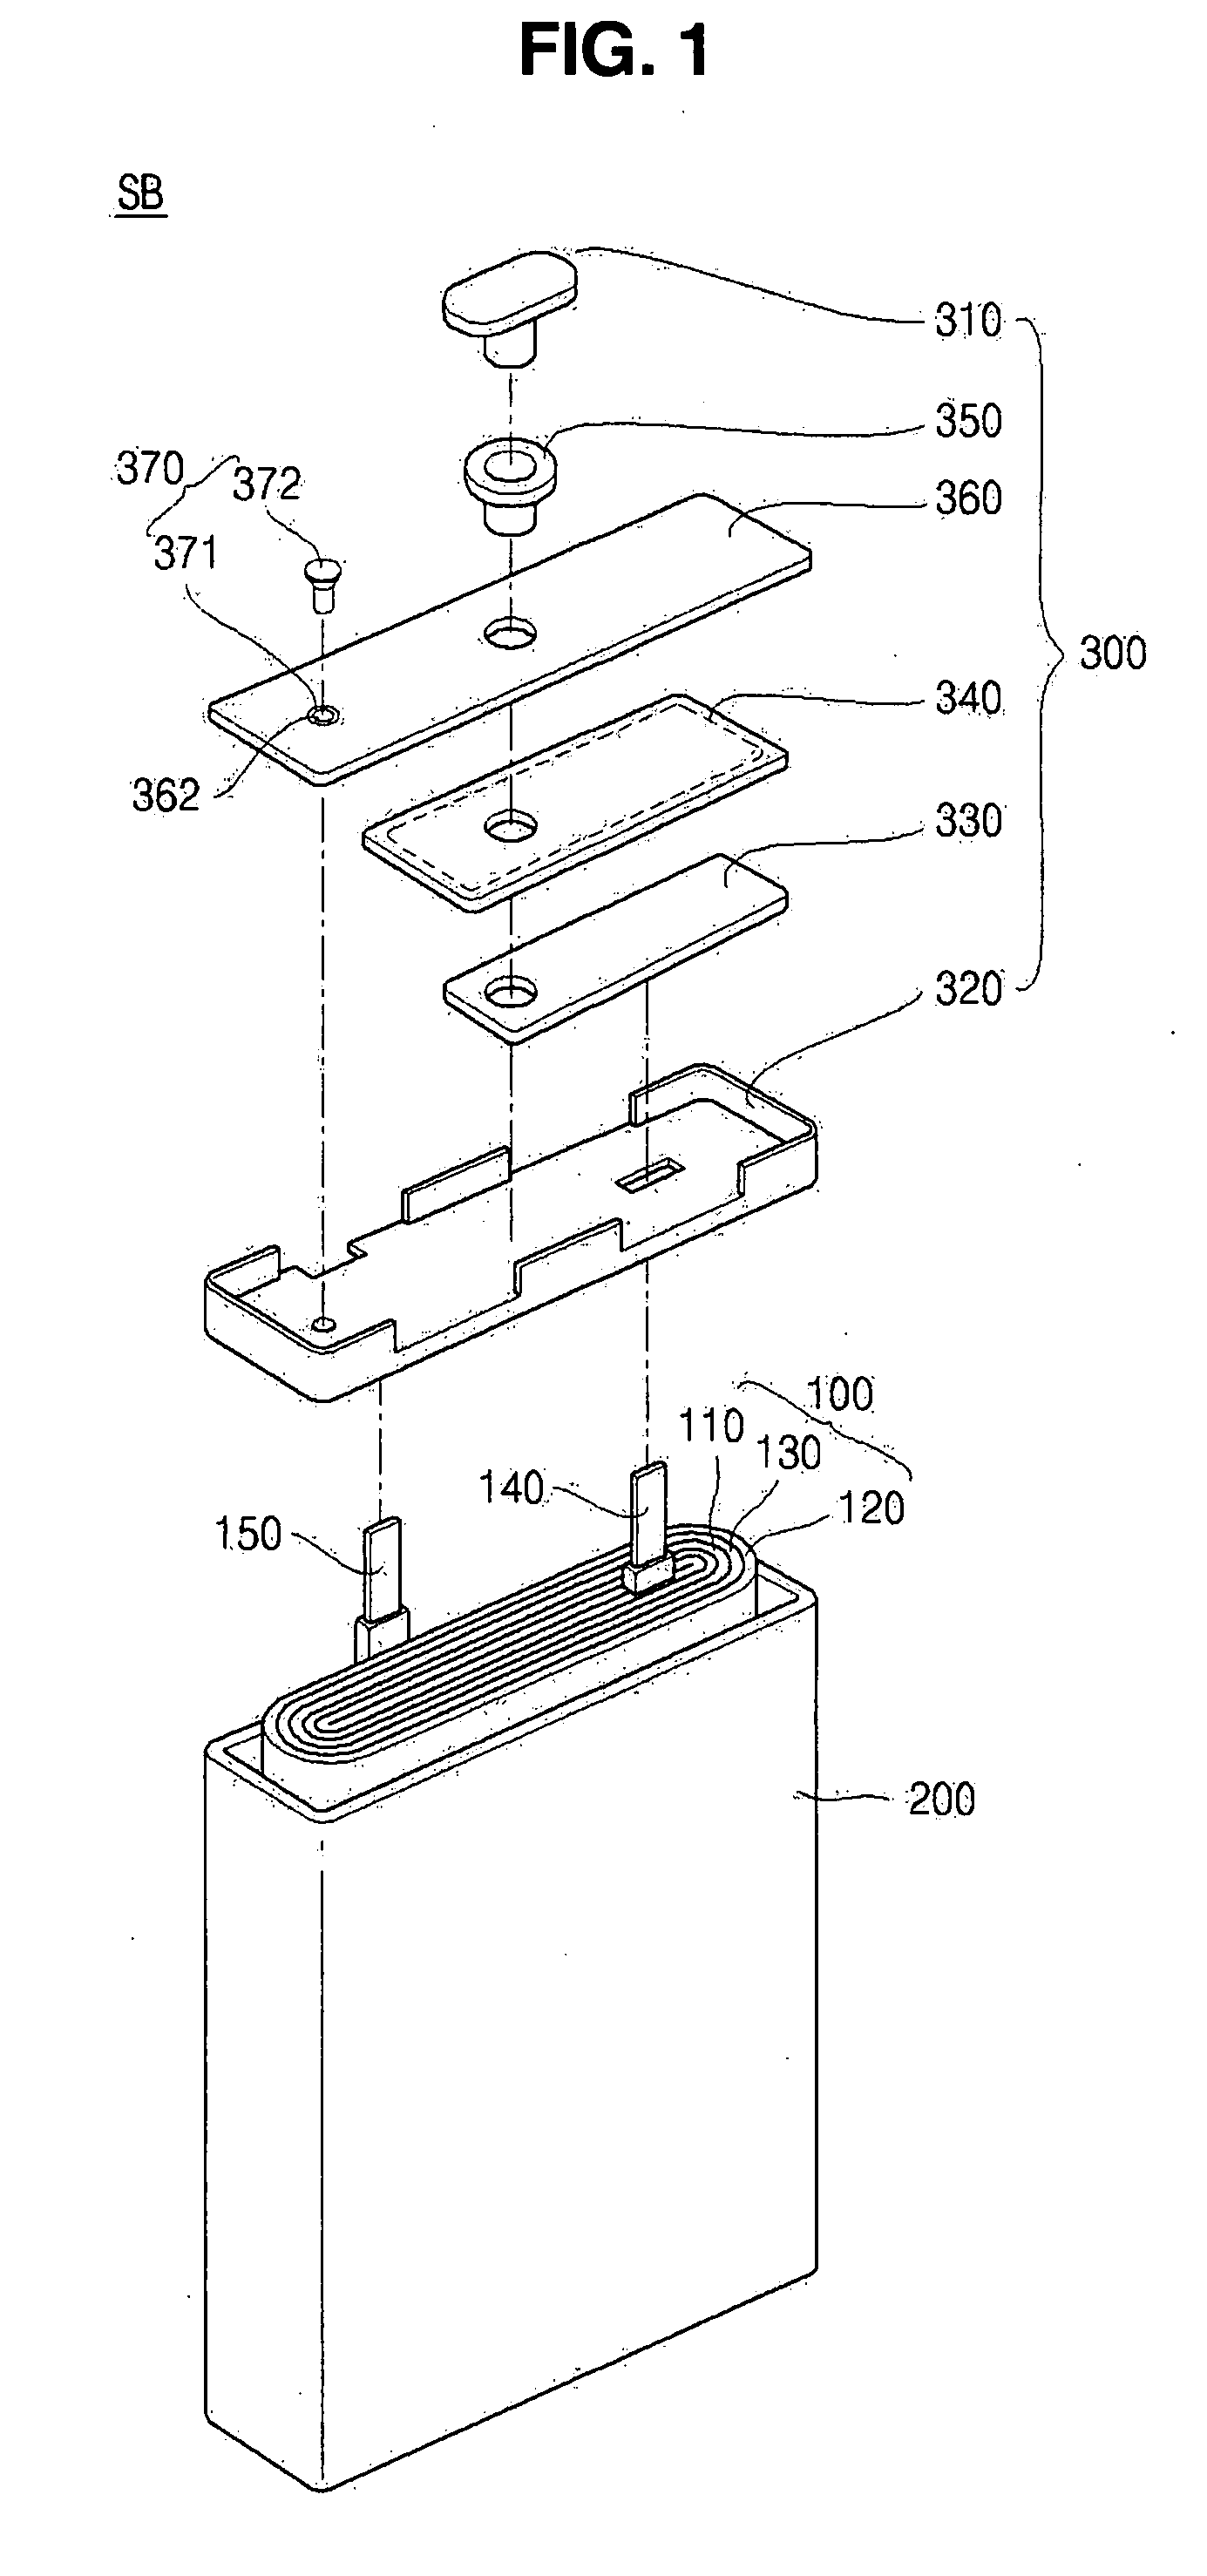 Secondary battery and its method of manufacture